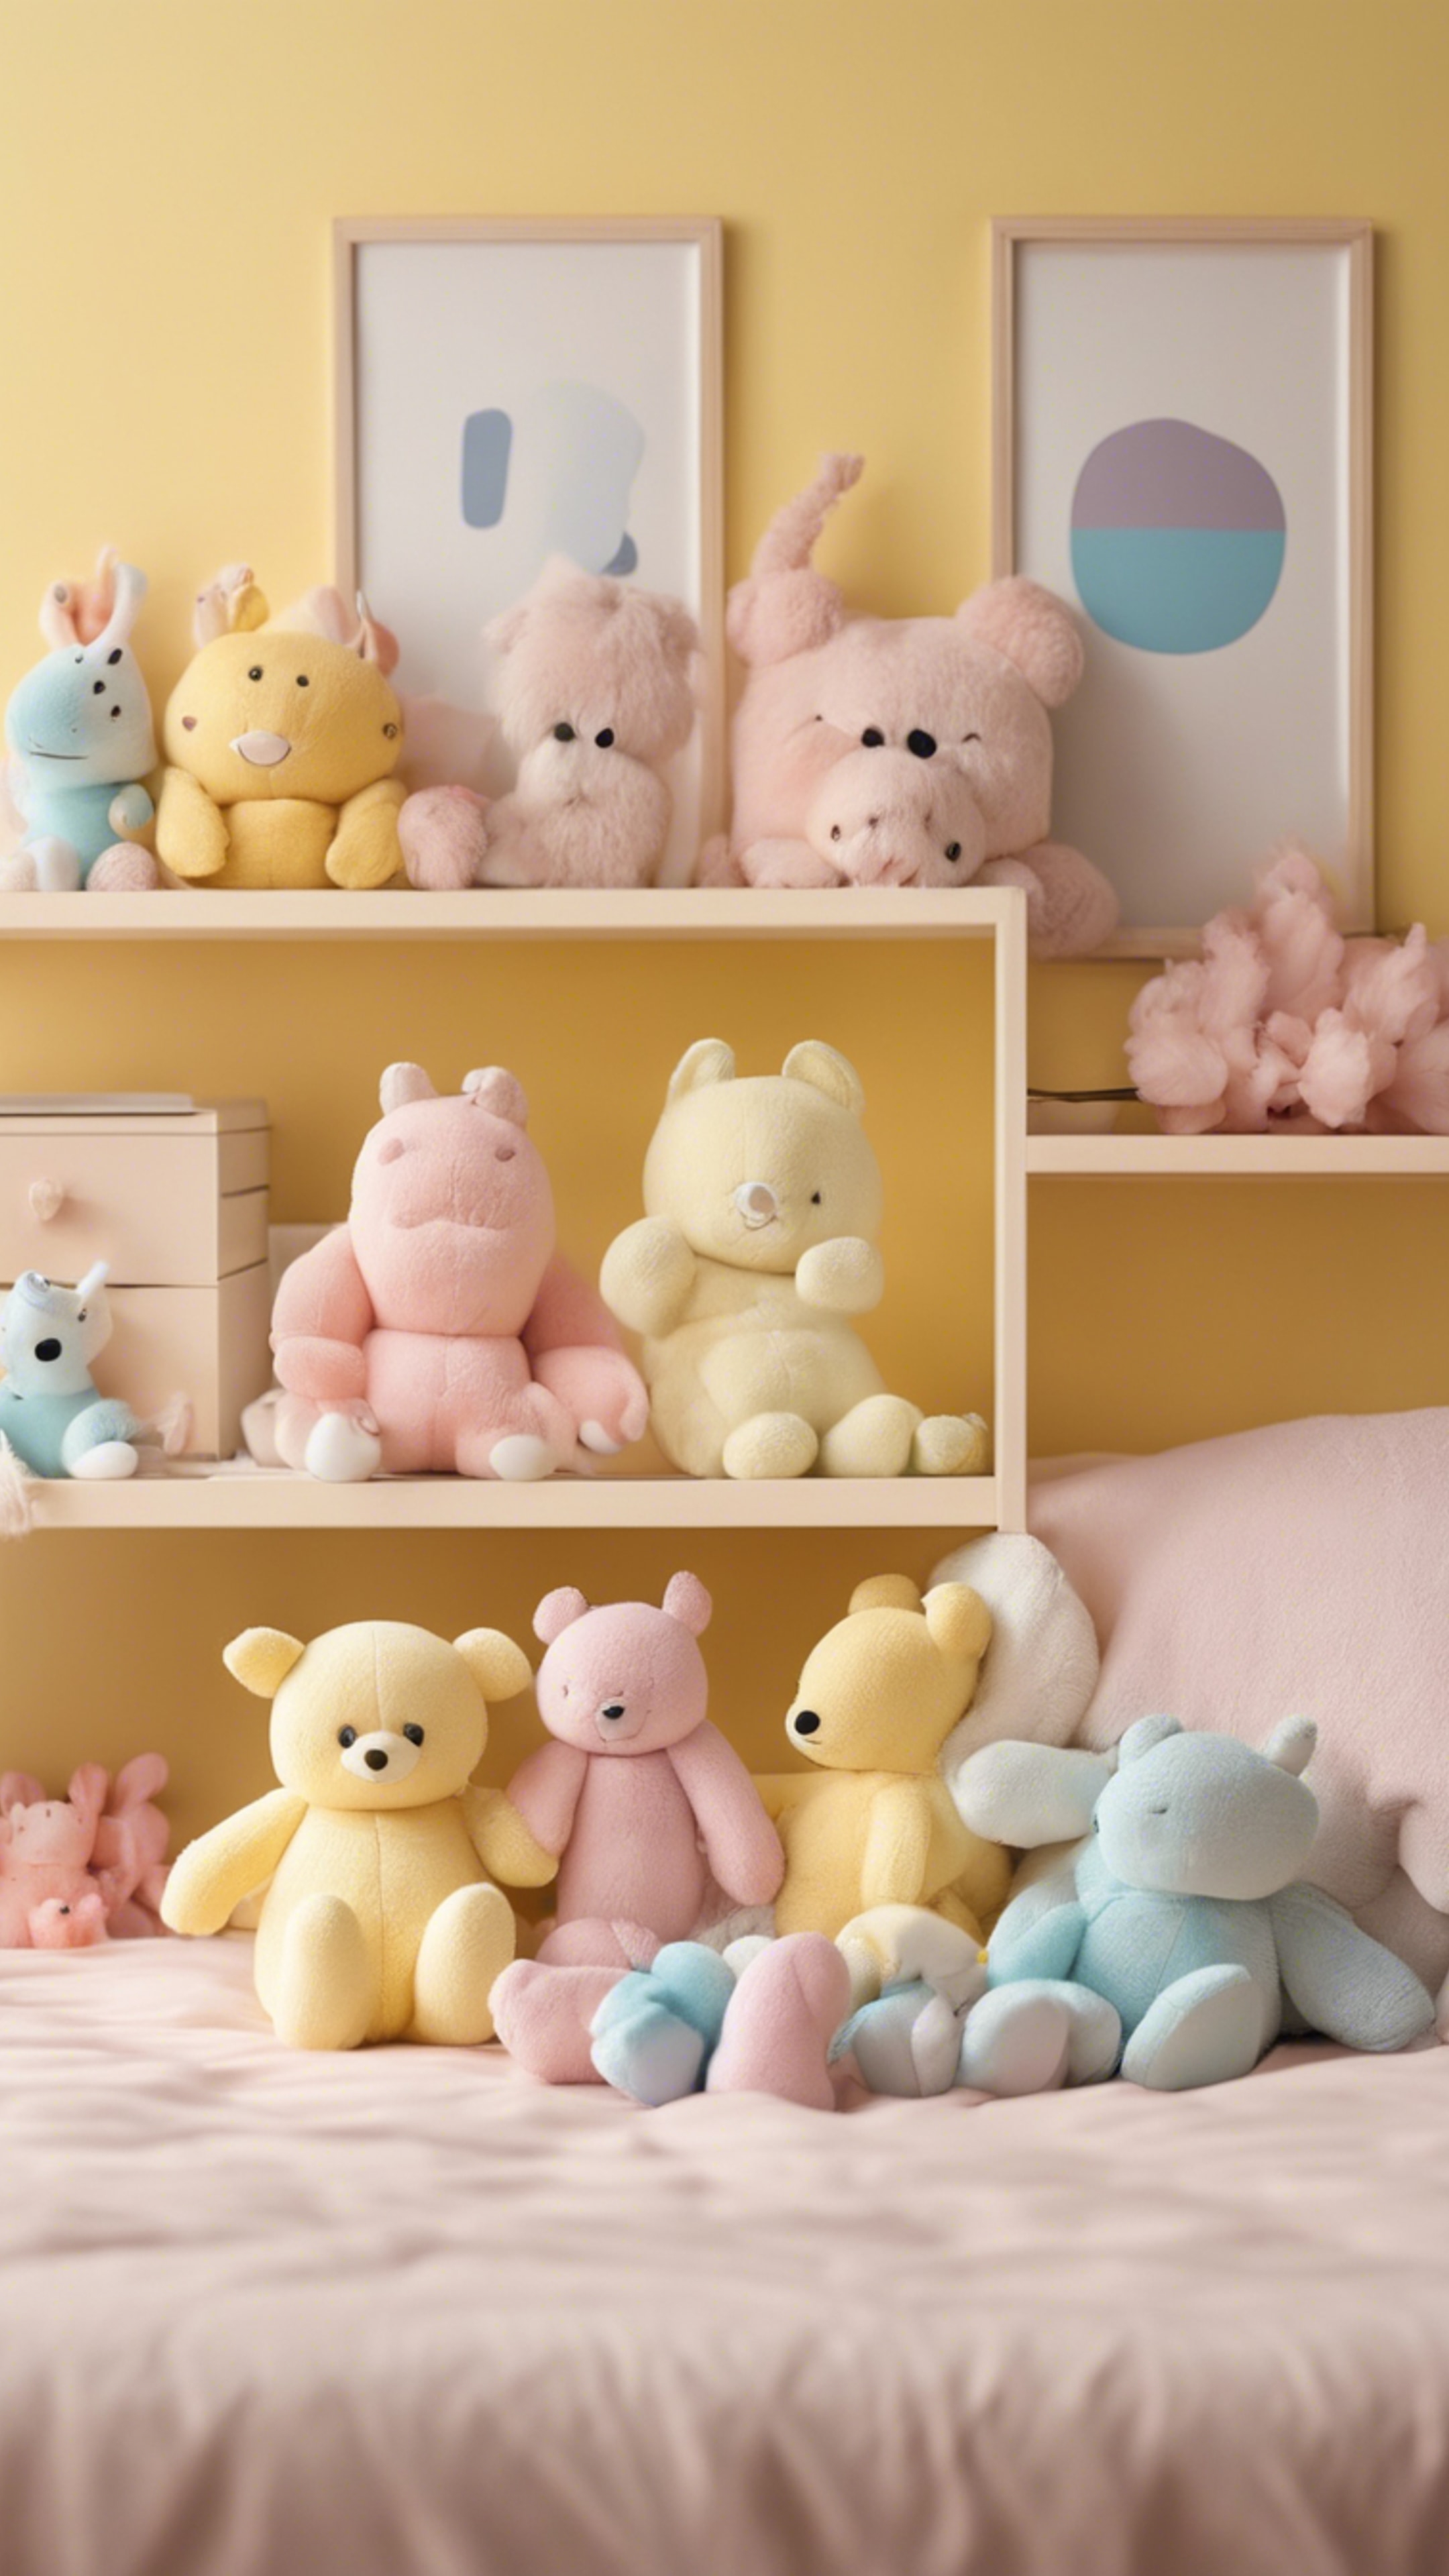 Tidy bedroom with pastel yellow walls decorated with kawaii plush toys. Шпалери[bea5098546c74f3e98b3]